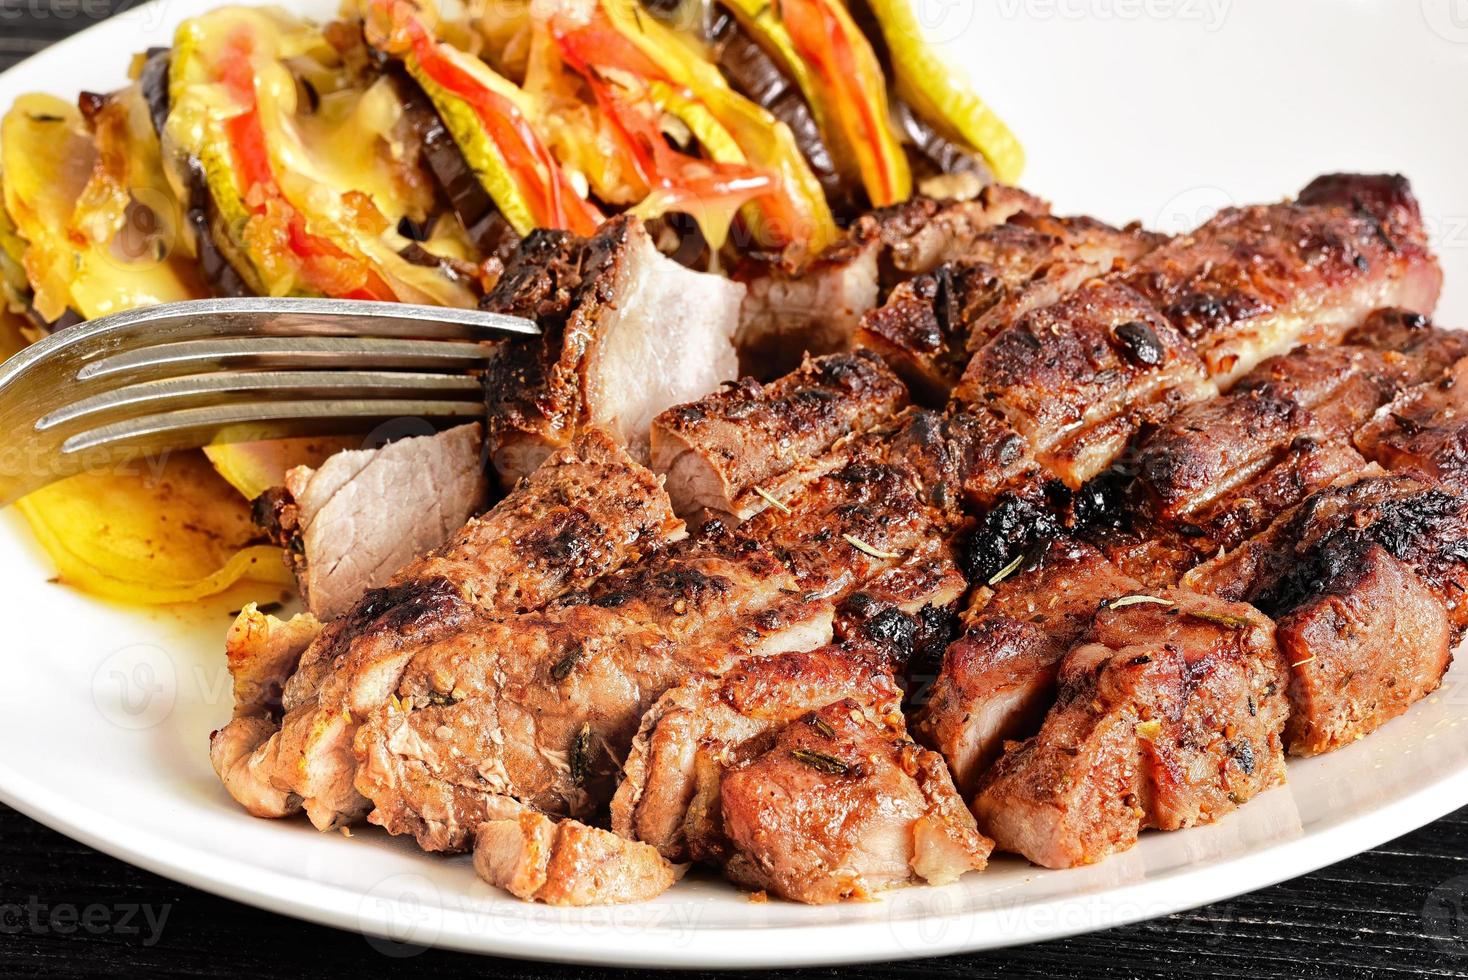 Steak and vegetables photo